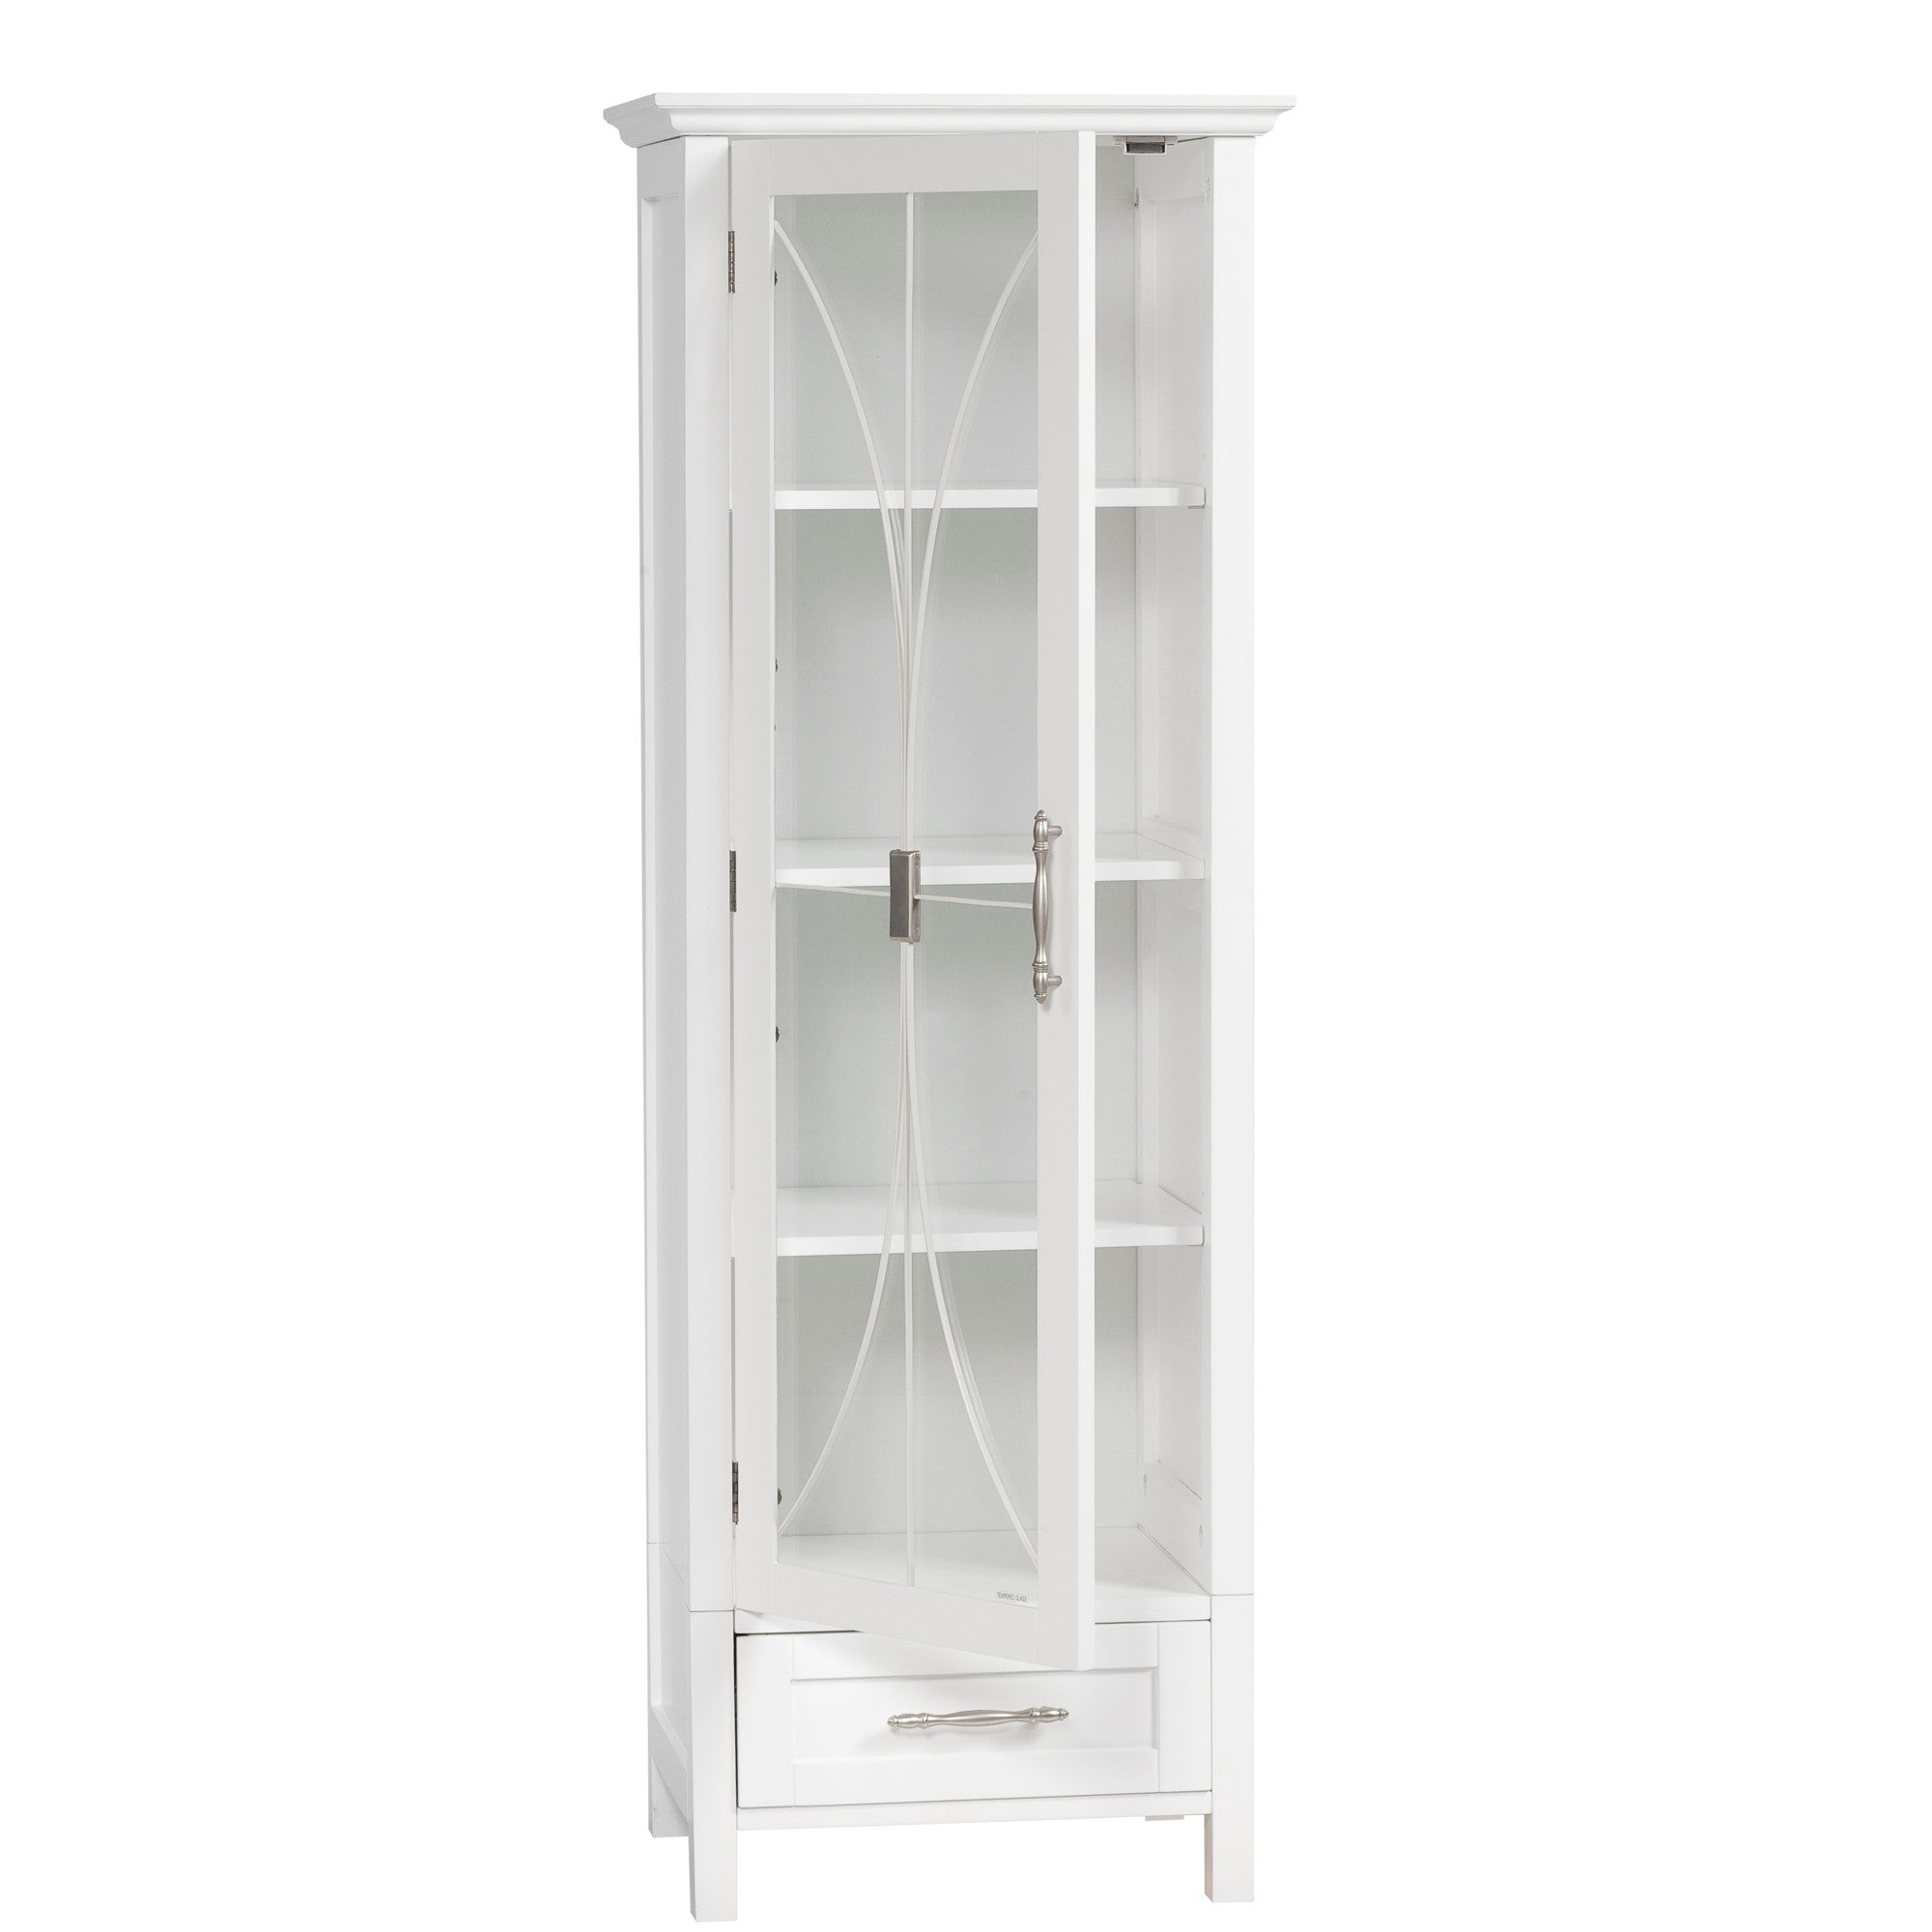 Teamson Home Delaney Free Standing Tall Slim Linen Storage Cabinet Tower with Glass Panel Door